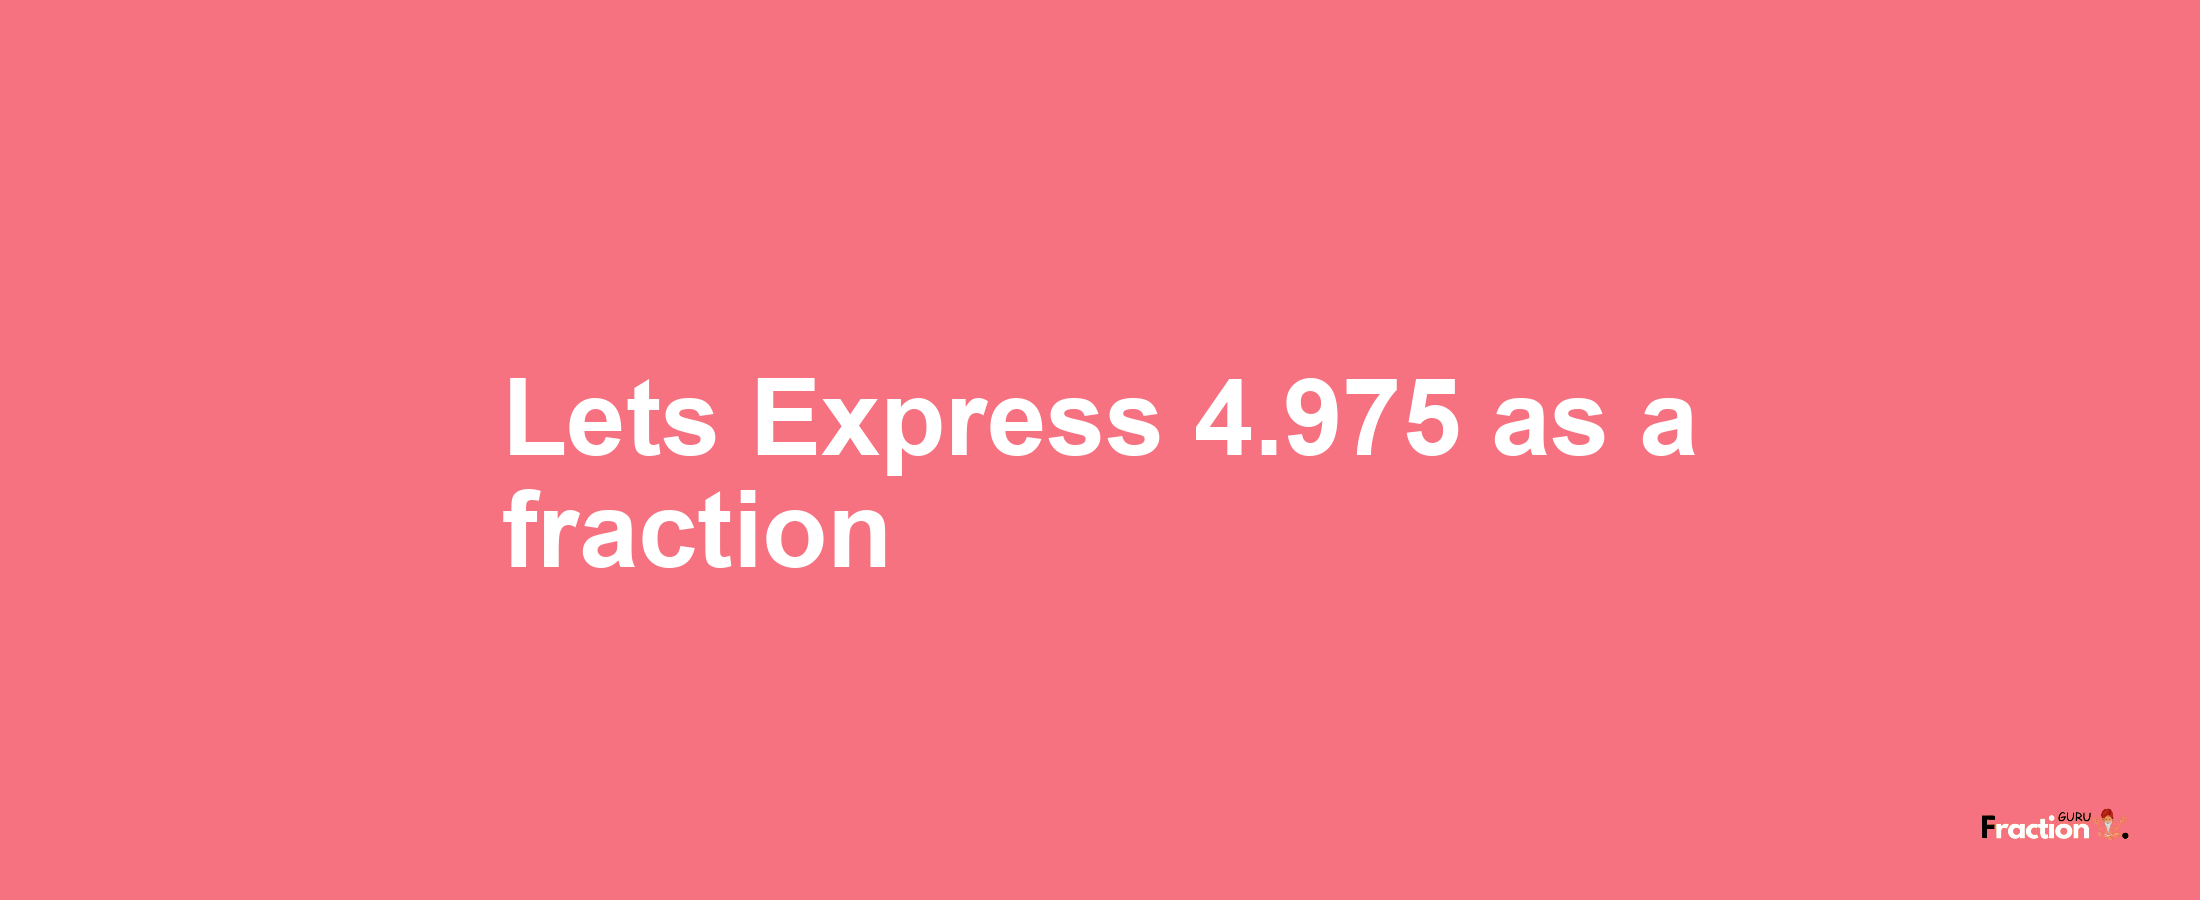 Lets Express 4.975 as afraction